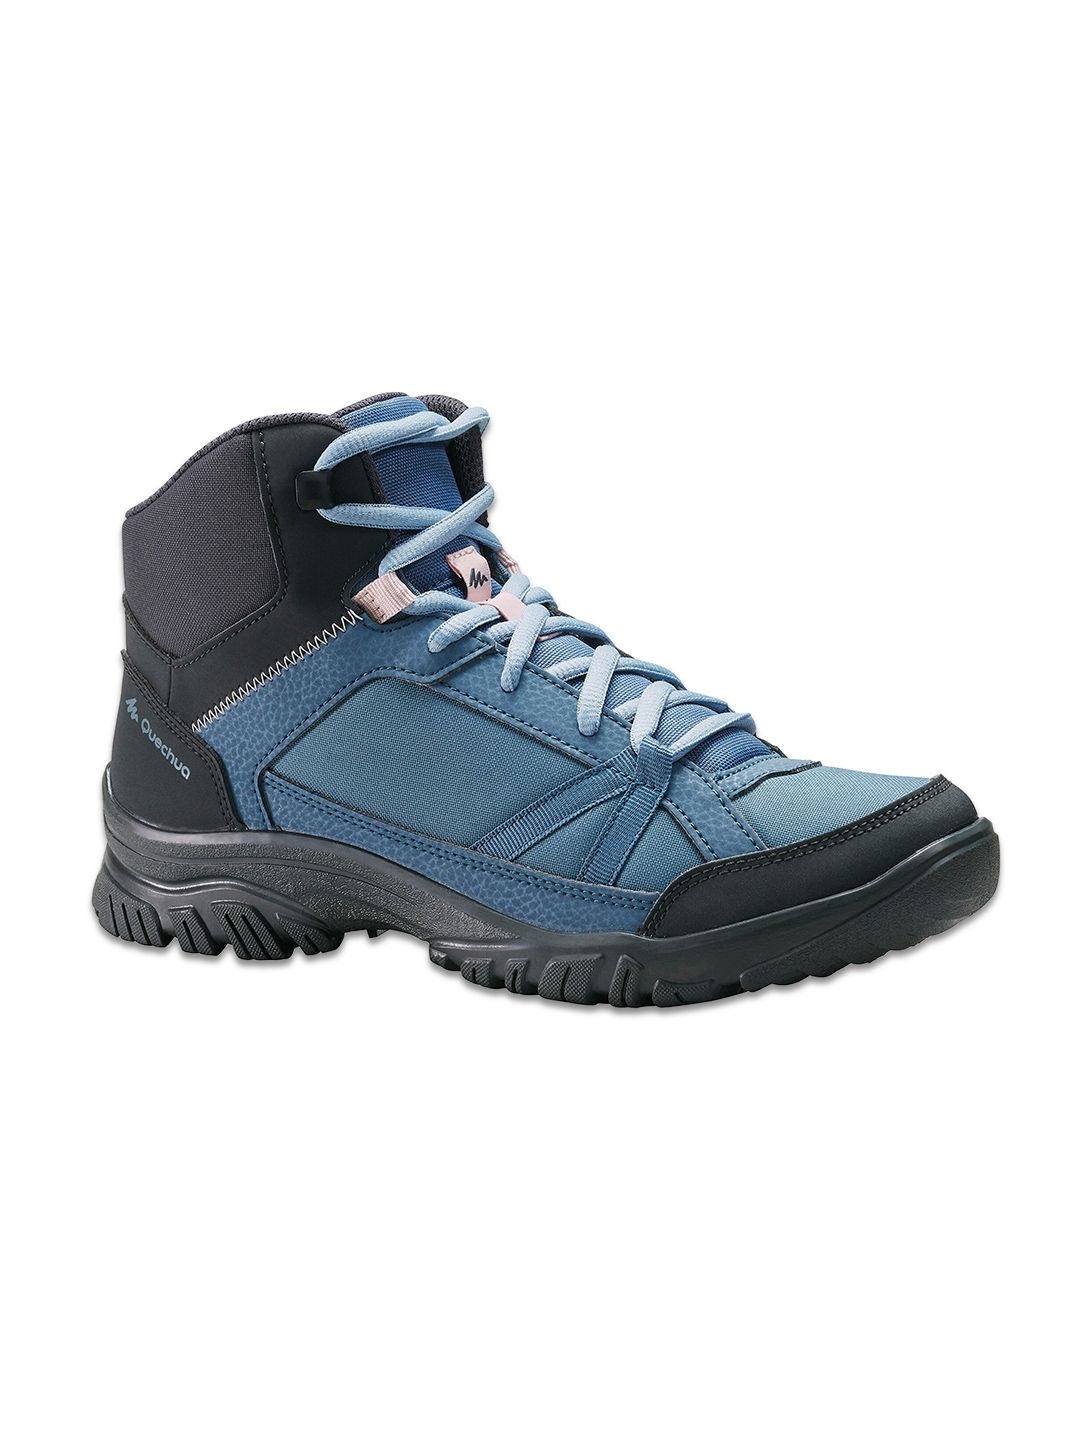 Quechua By Decathlon Women Blue Textile Trekking Non-Marking Shoes Price in India